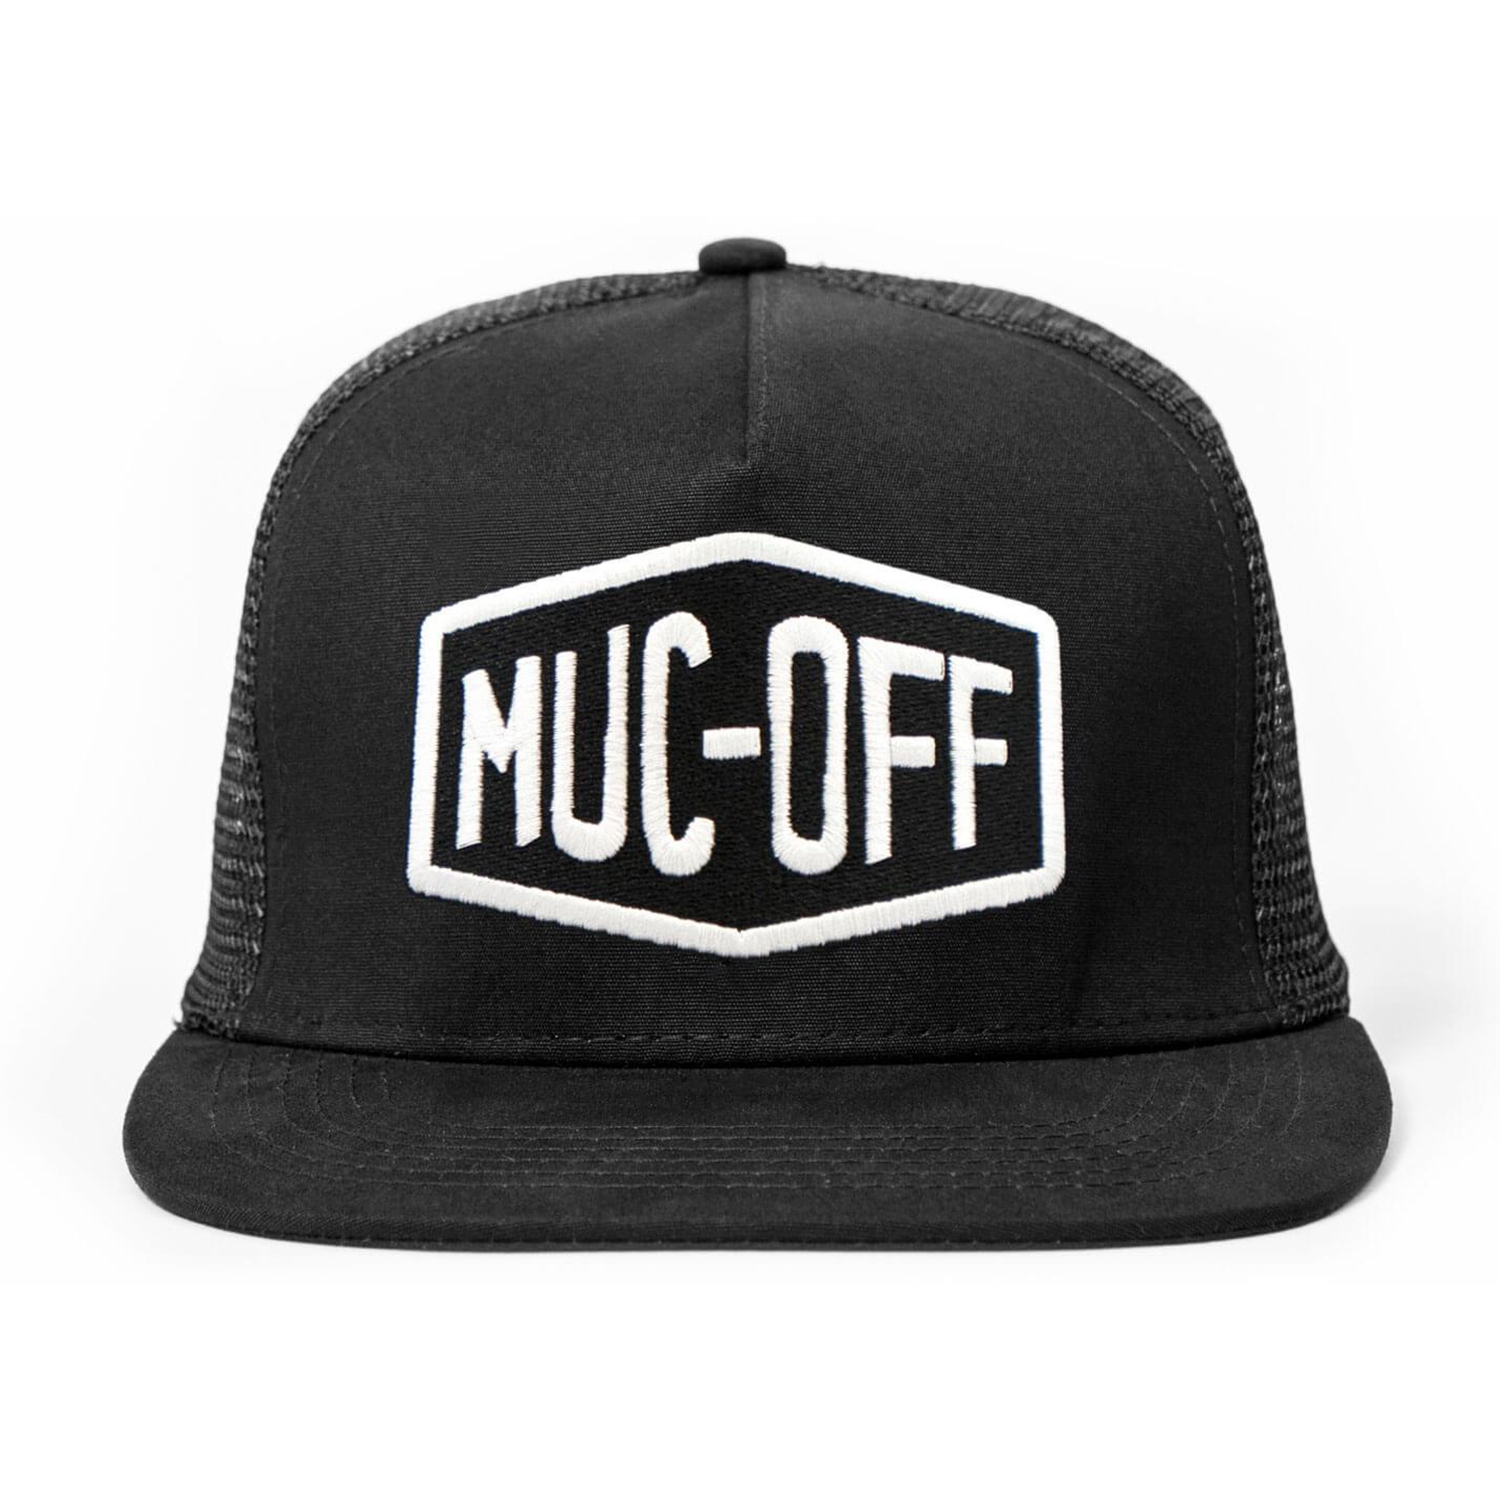 Picture of Muc-Off Works Mesh Back Trucker Cap - black